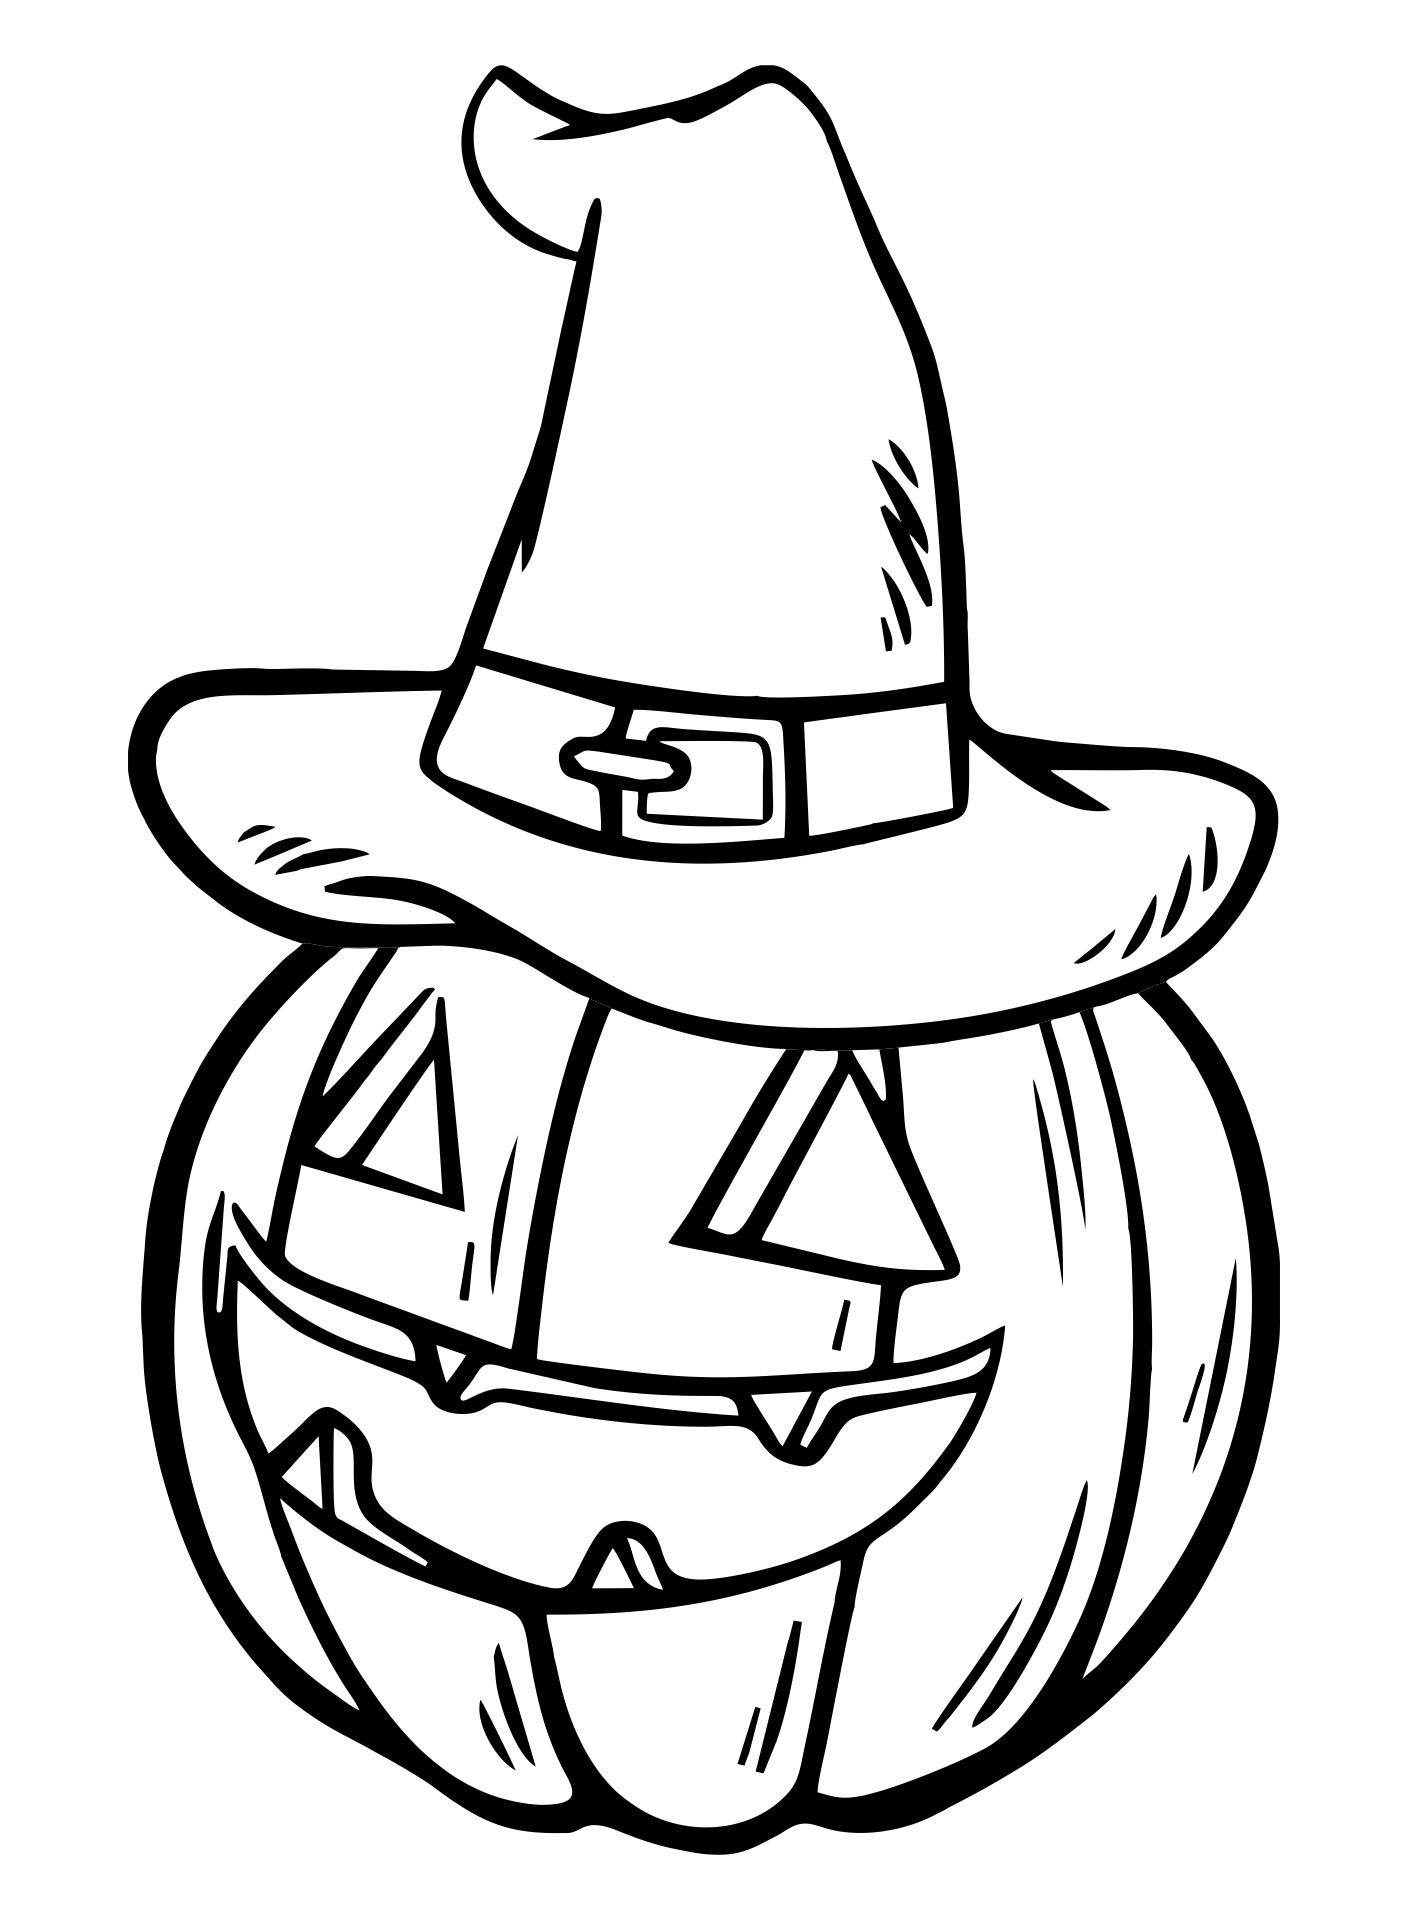 Halloween Pumpkin Witches Hat Coloring Pages Printable